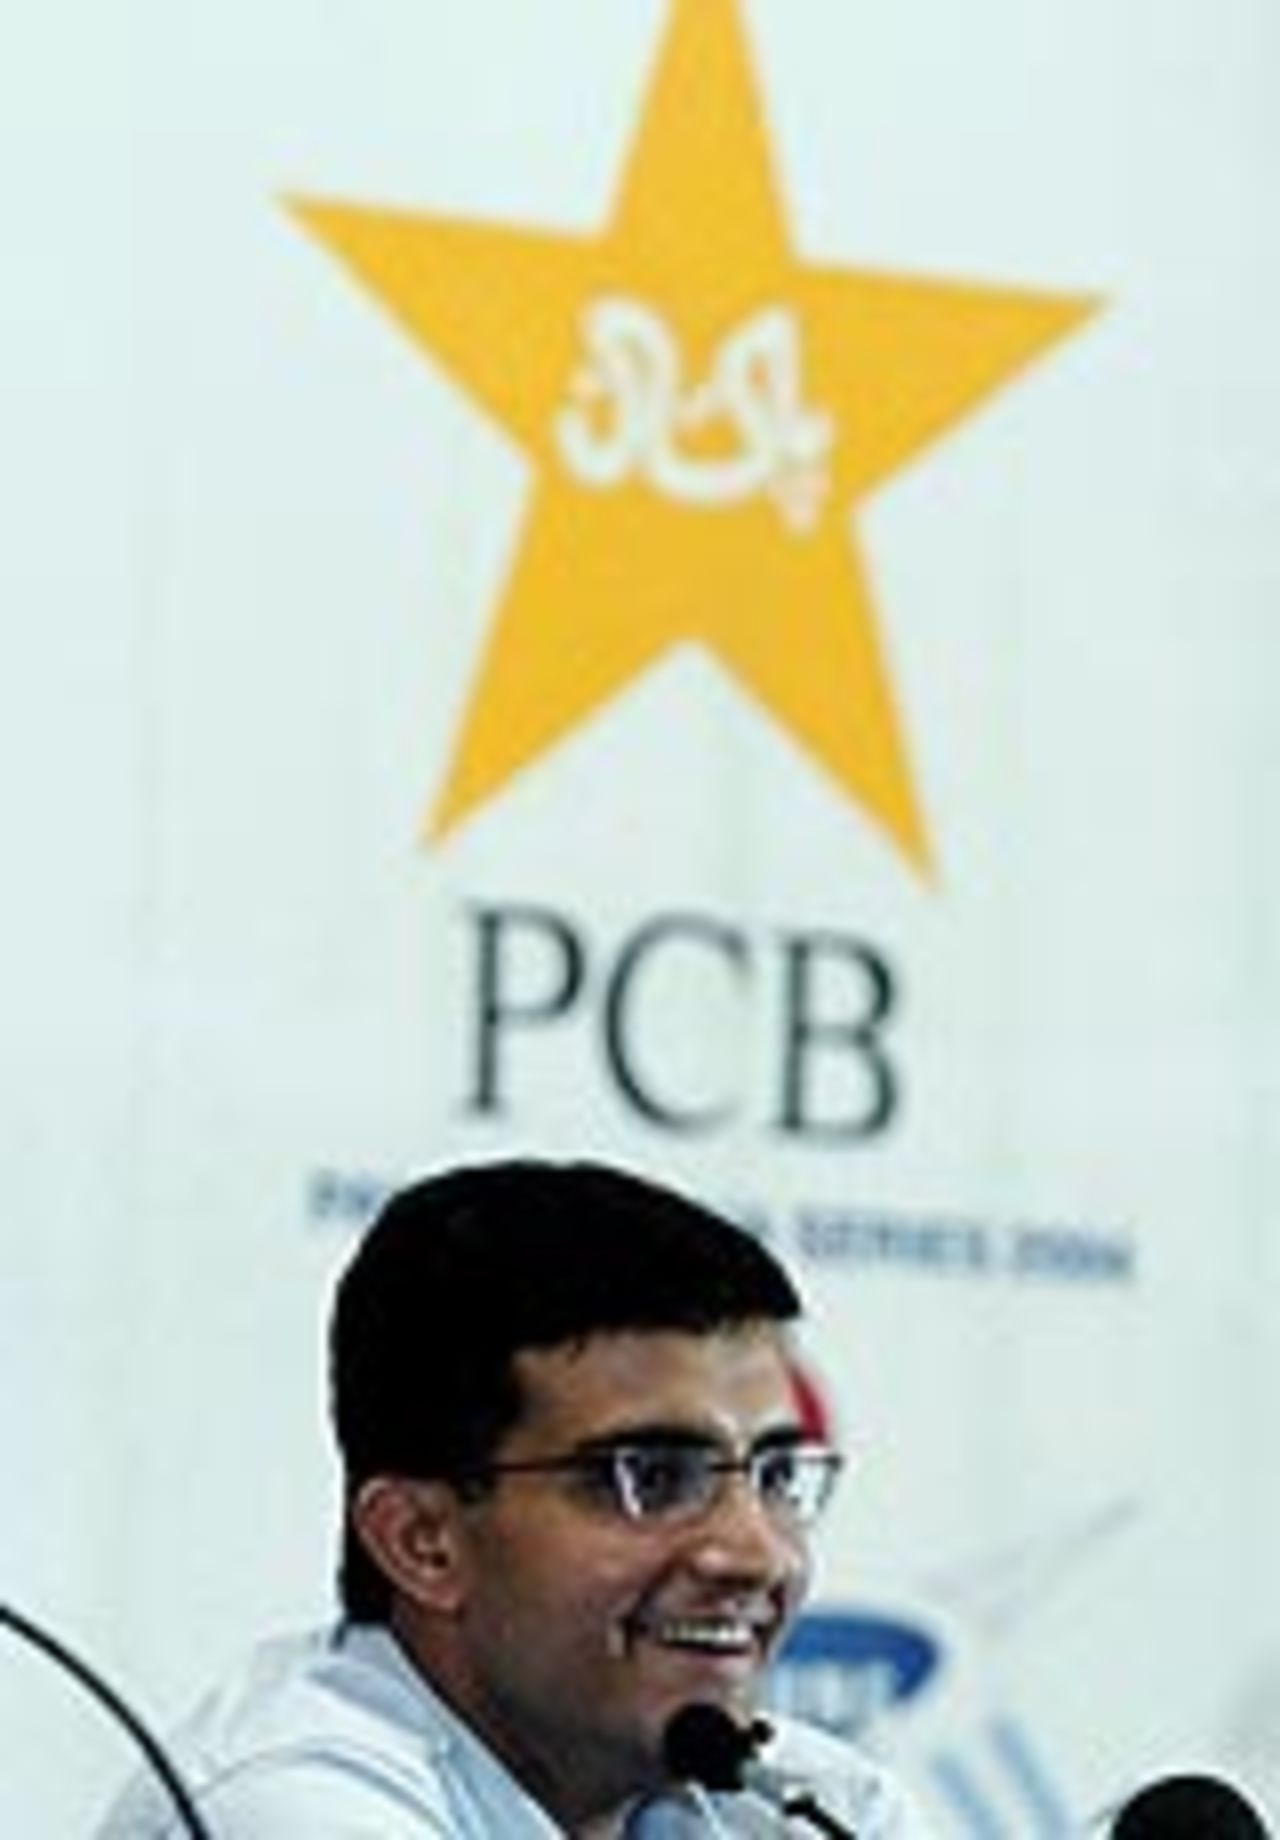 Sourav Ganguly attends a press conference in Lahore, India in Pakistan, March 10, 2004